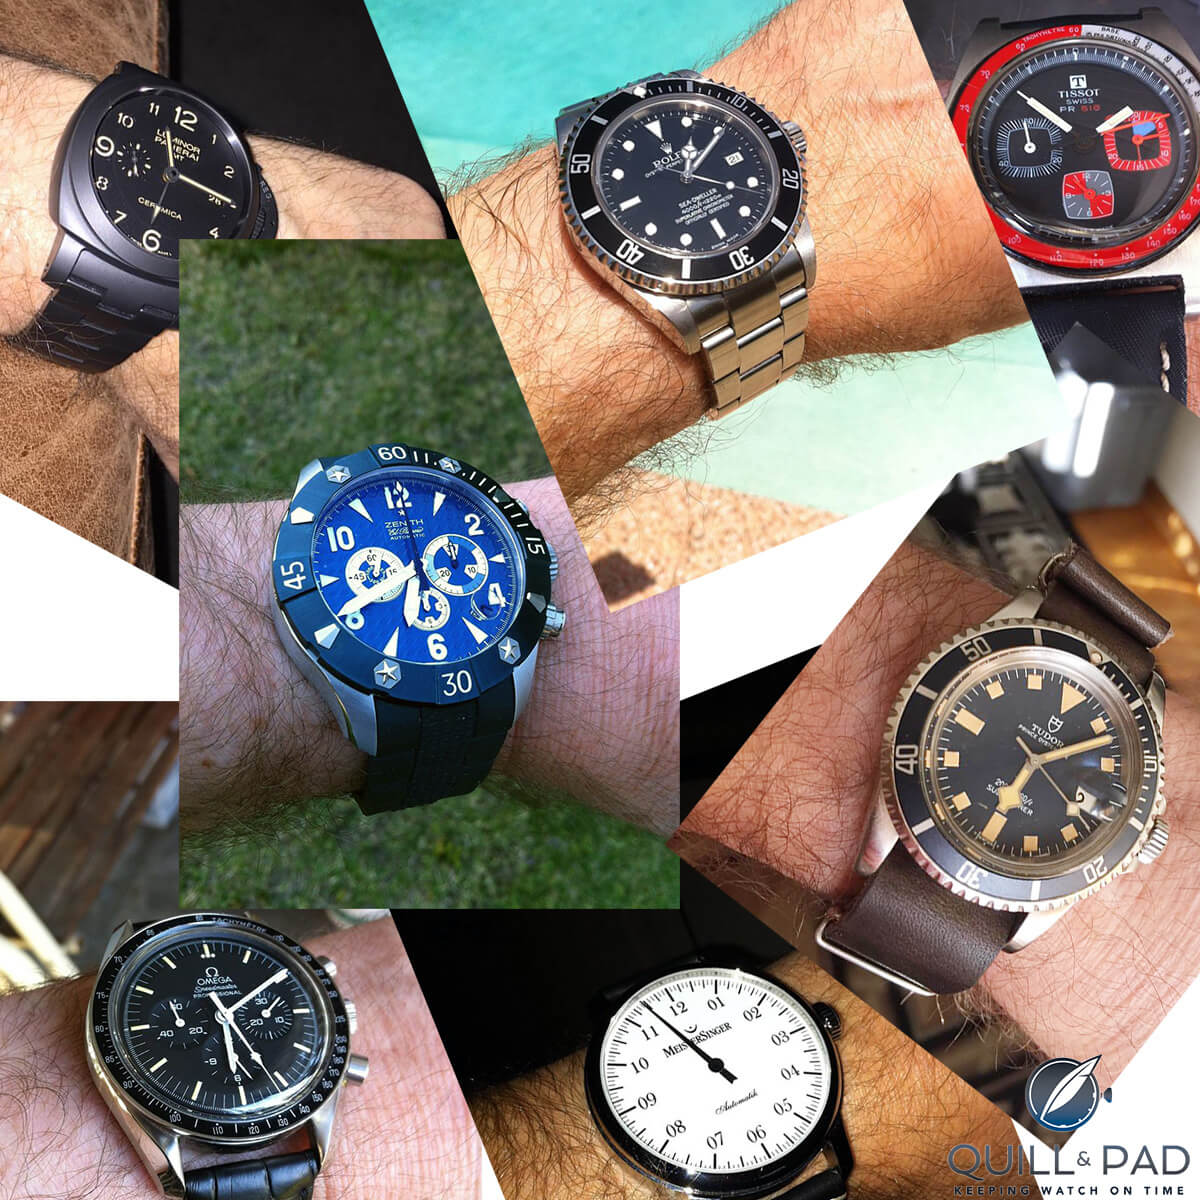 A few of the watches in Eric Singer's collection: (clockwise from top left) Panerai Luminor 1950 3 Days GMT Tuttonero, Rolex Sea-Dweller, Tissot 516, Tudor Prince, Meistersinger Gran Matik, Omega Speedmaster, and blue-dial Zenith Defy Classic